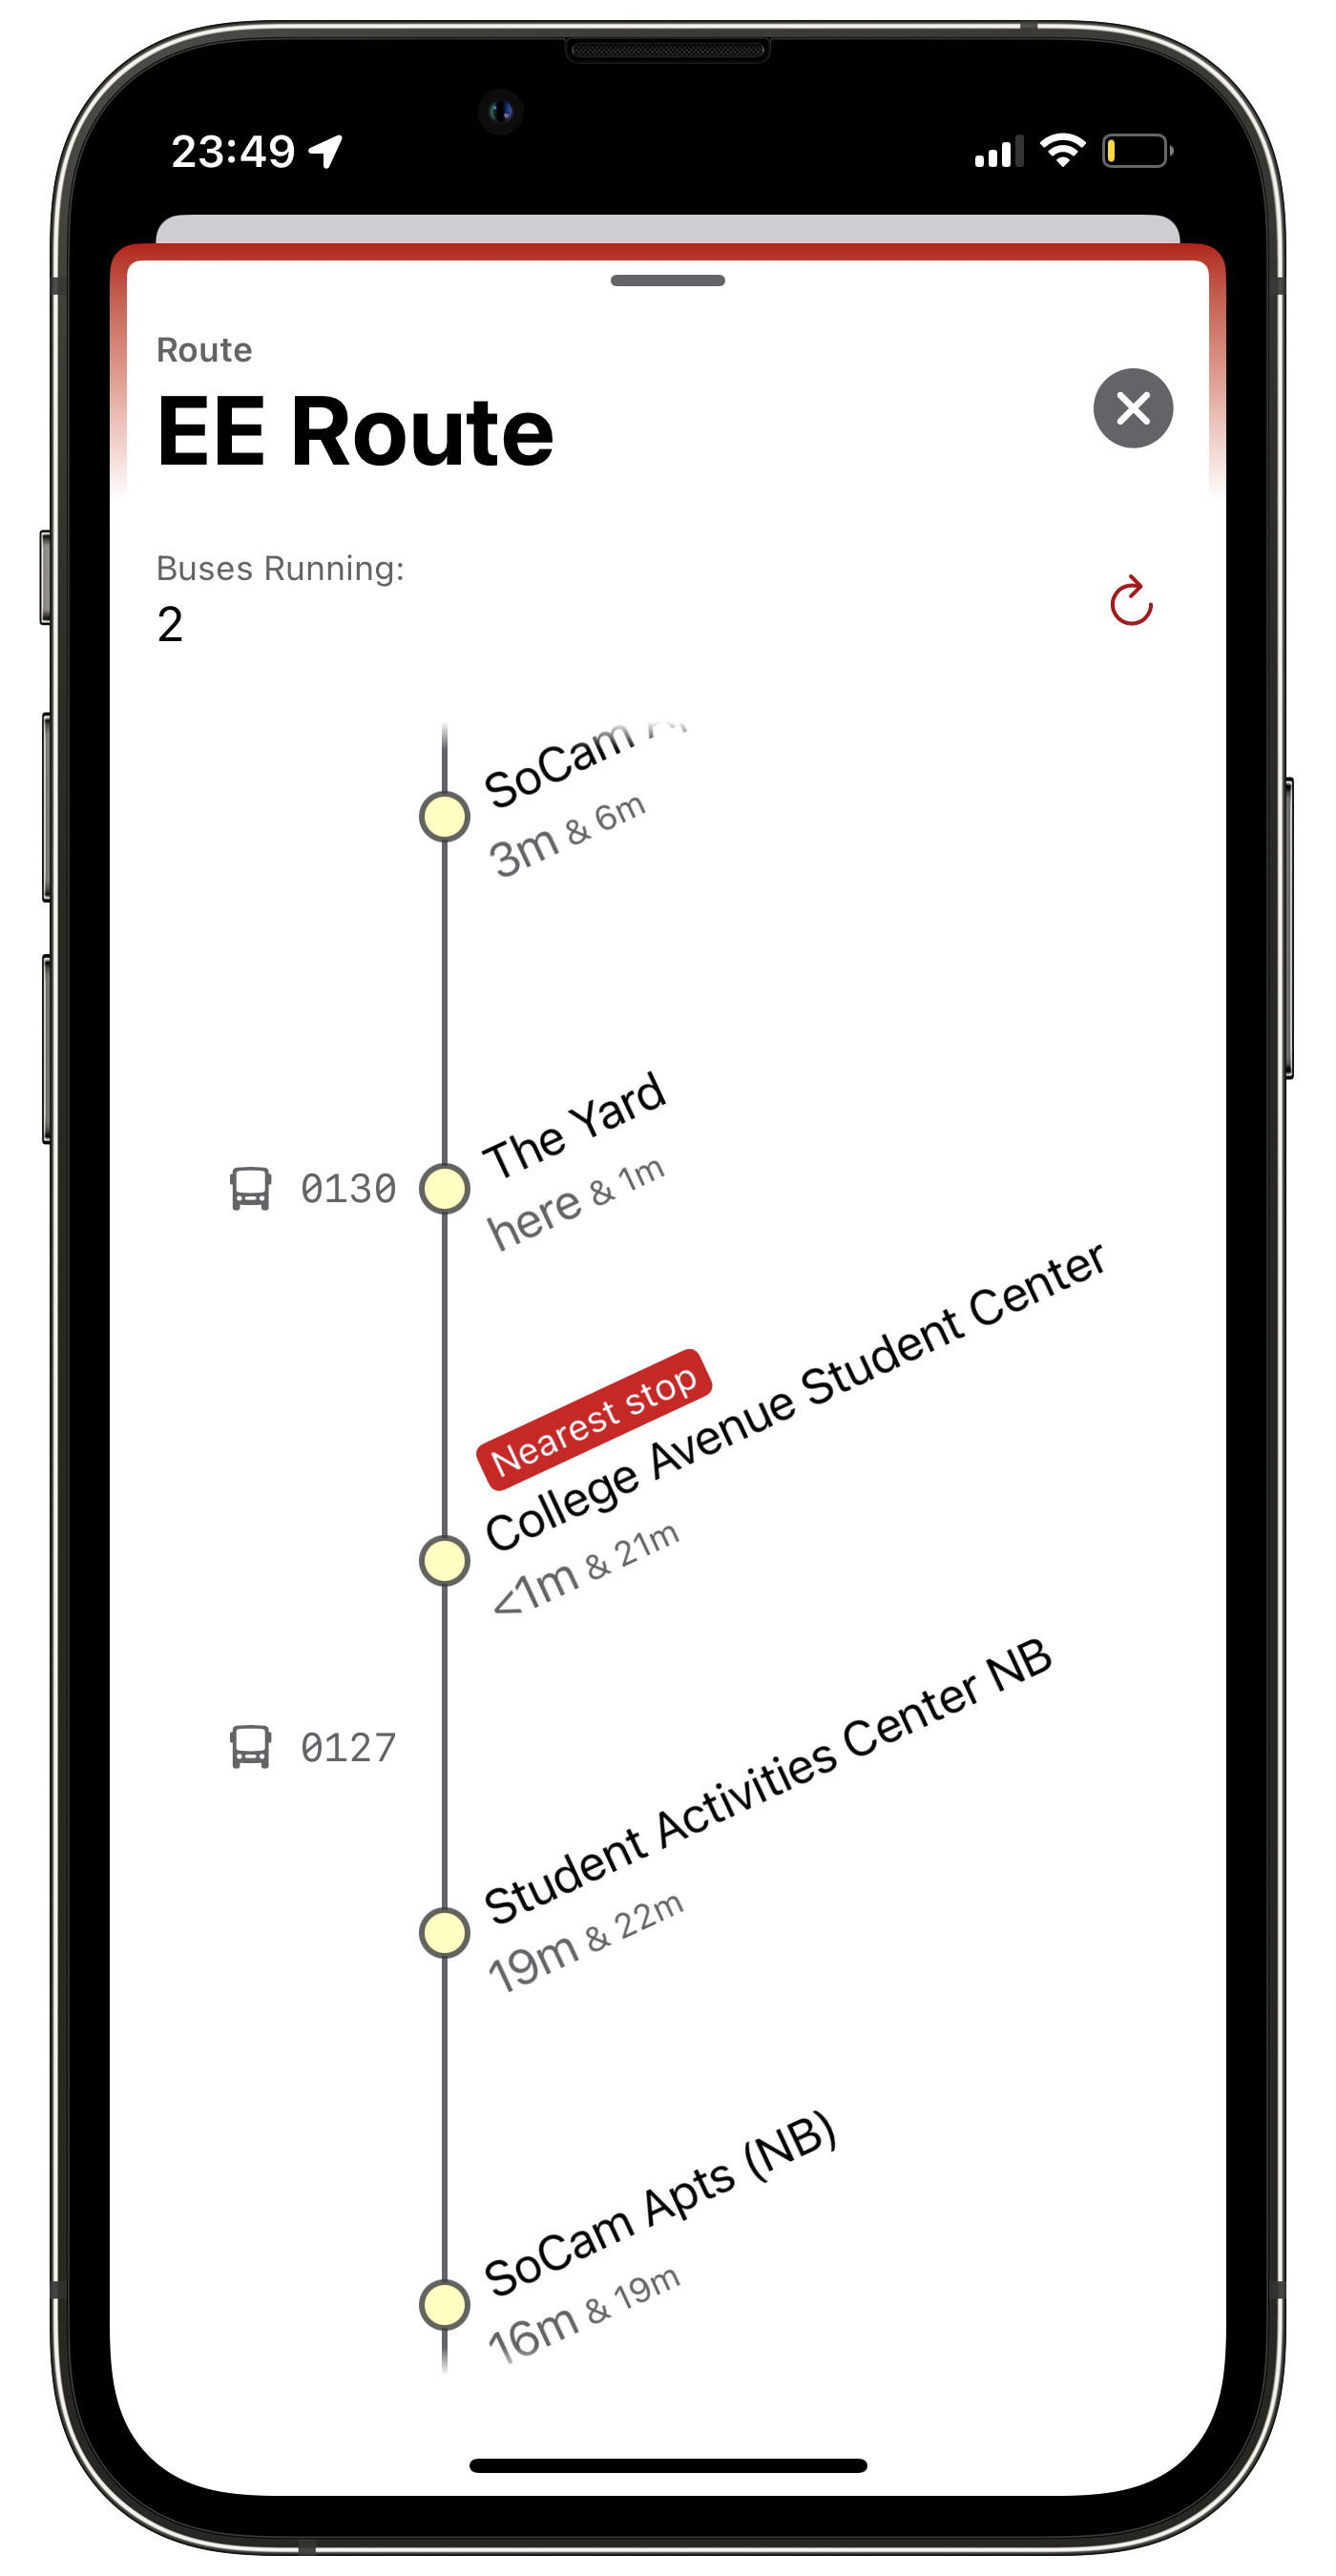 A popover showing the EE route, it's stops, and current buses in the RURadar App